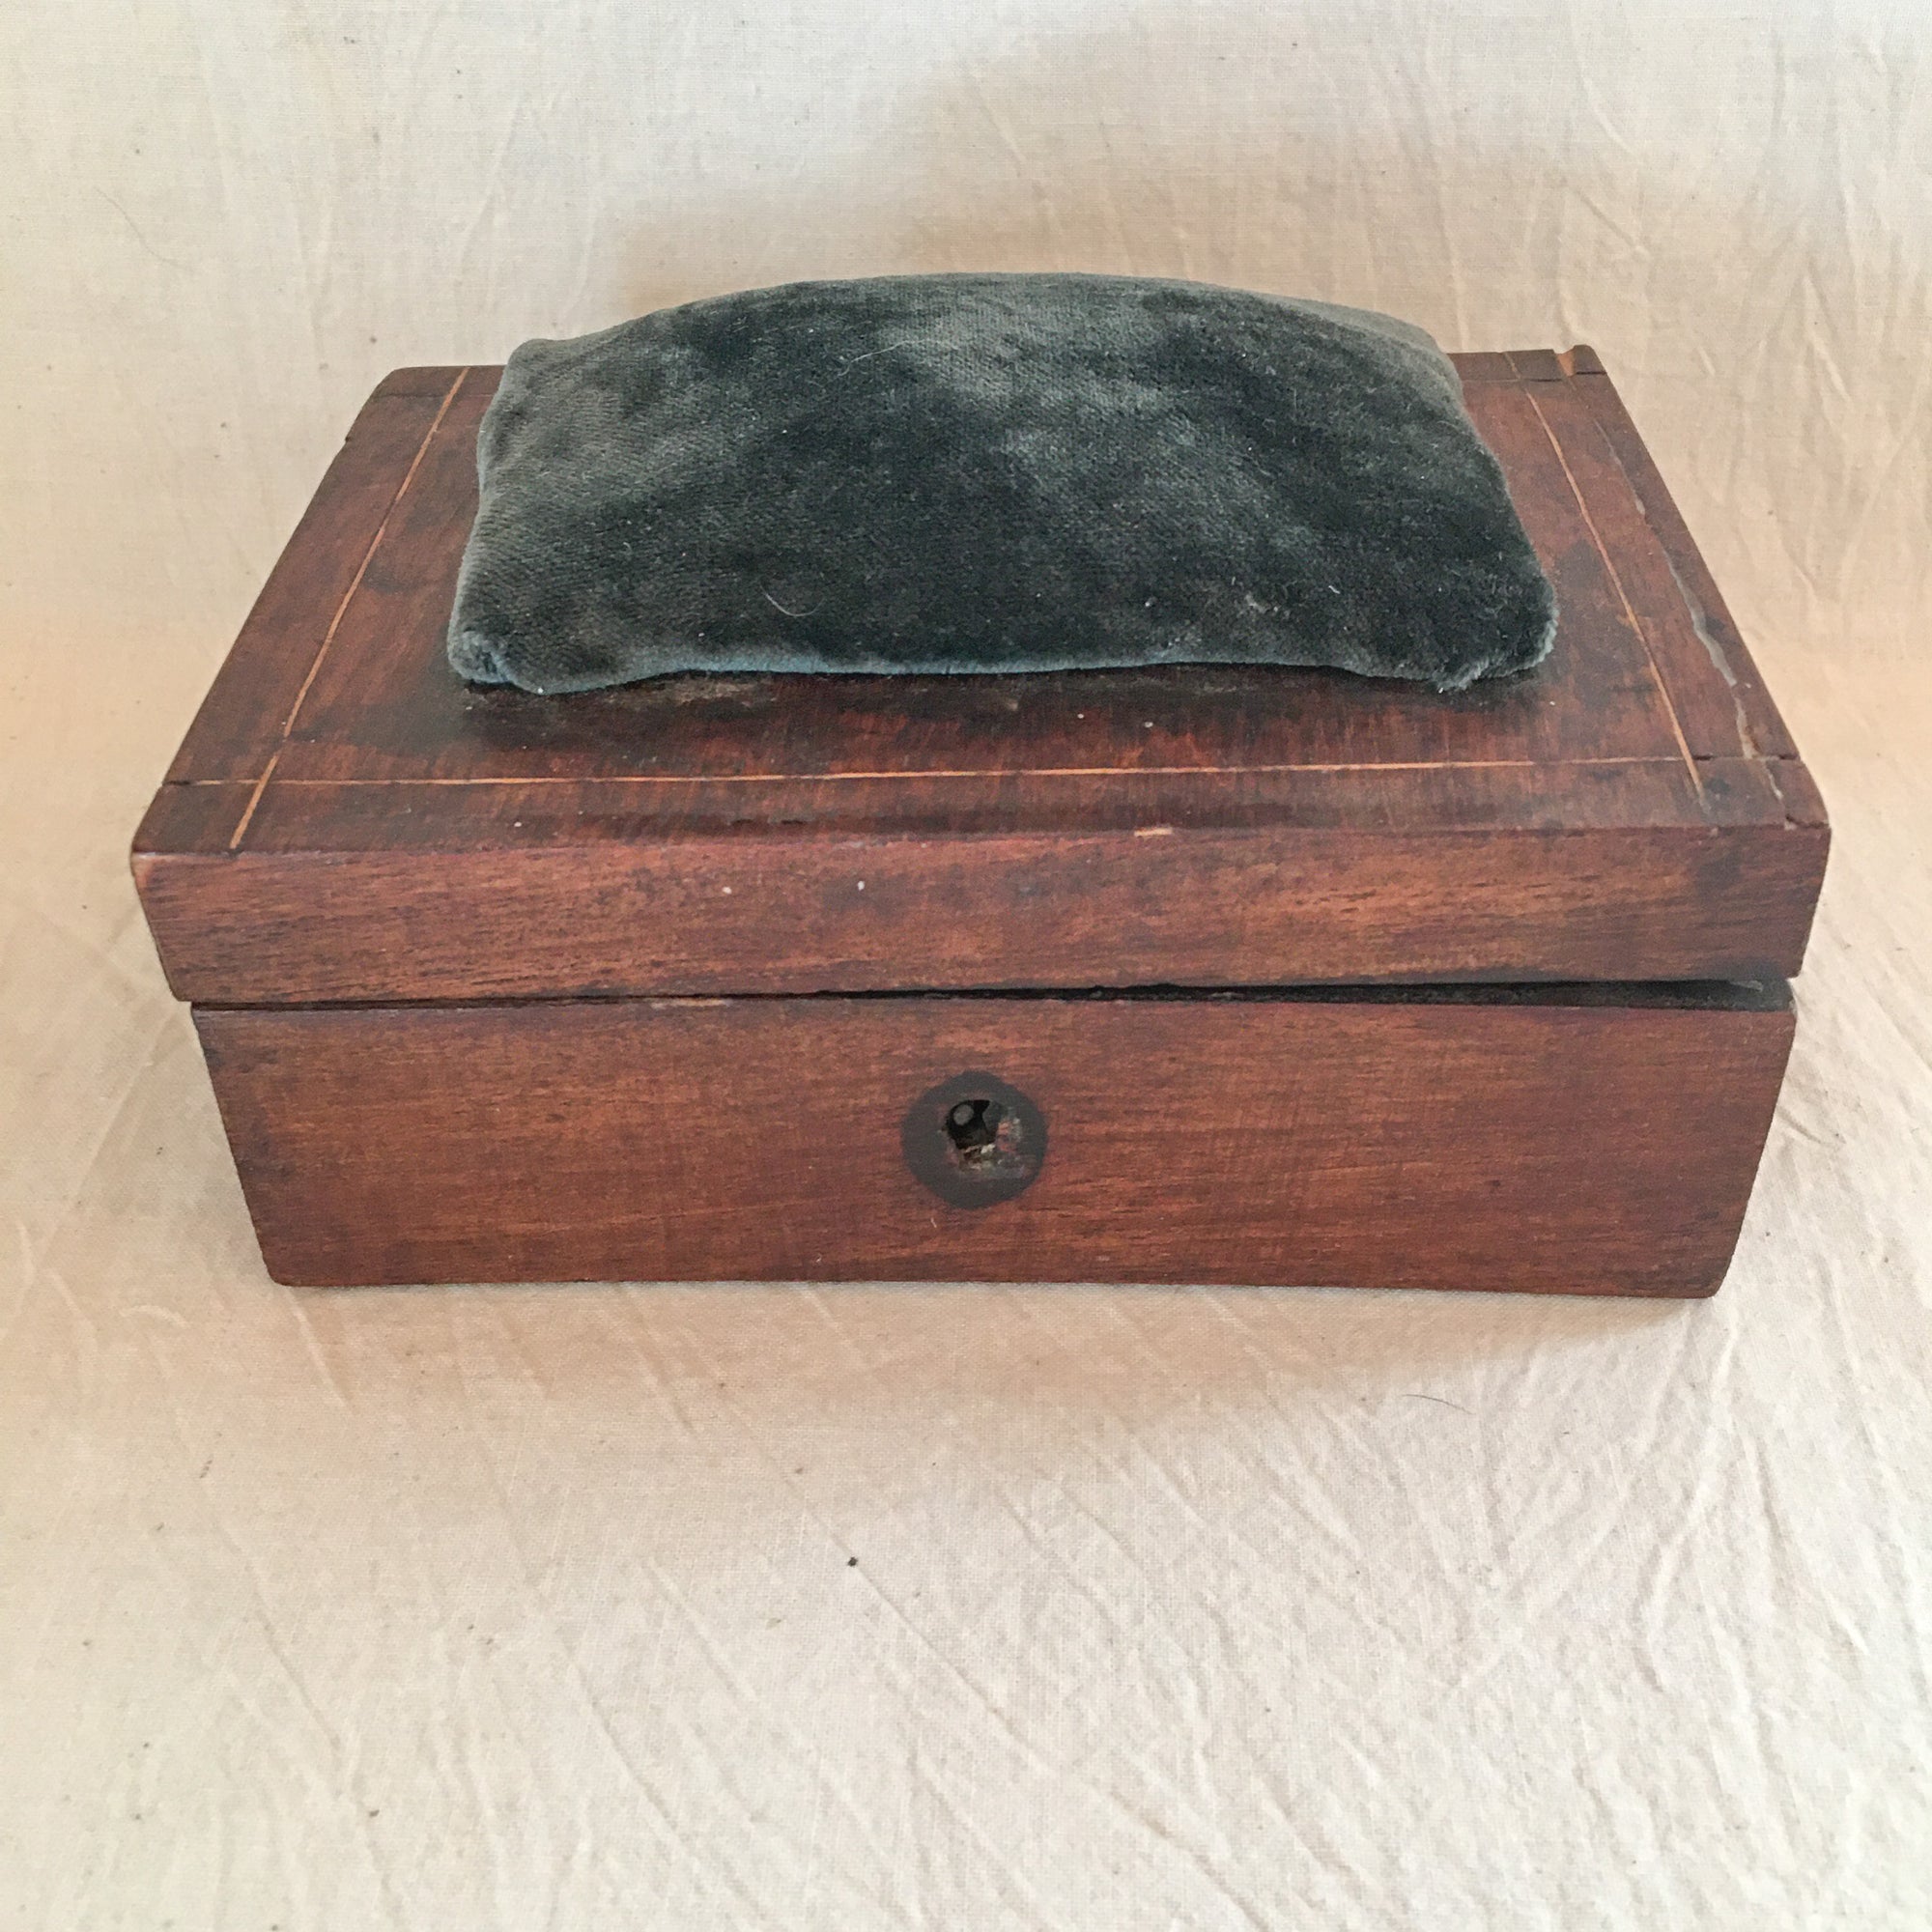 Antique Hand Made Sewing Box with Pin Cushion, Bone Crochet Hooks